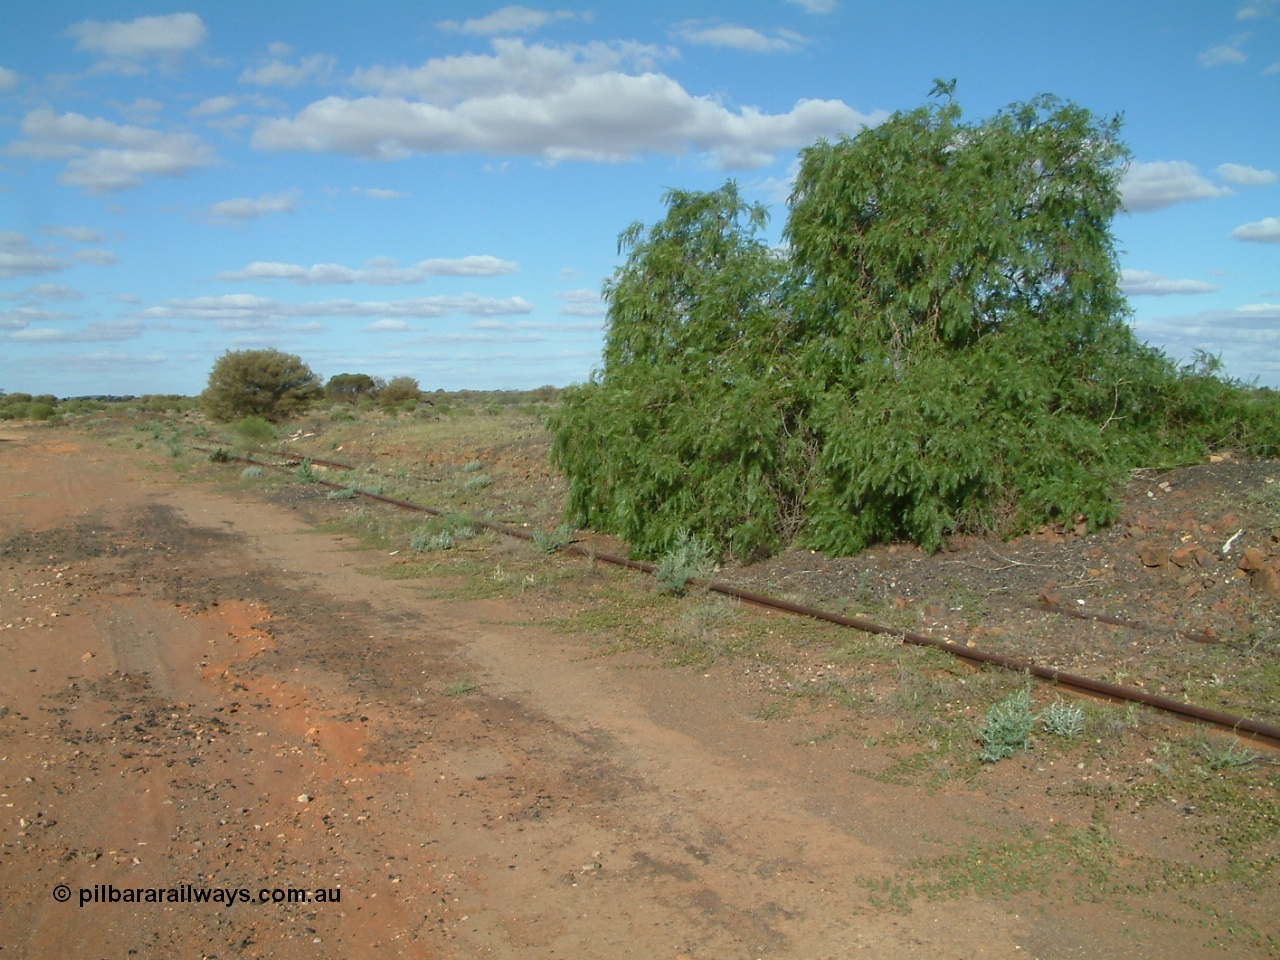 030415 155314
Tarcoola, at the 504.5 km, looking south east at the remains of the head shunt off the Camp Train and No. 1 Water Roads. [url=https://goo.gl/maps/1664sPzPxipPs6mZ6]GeoData location[/url]. 15th April 2003.
